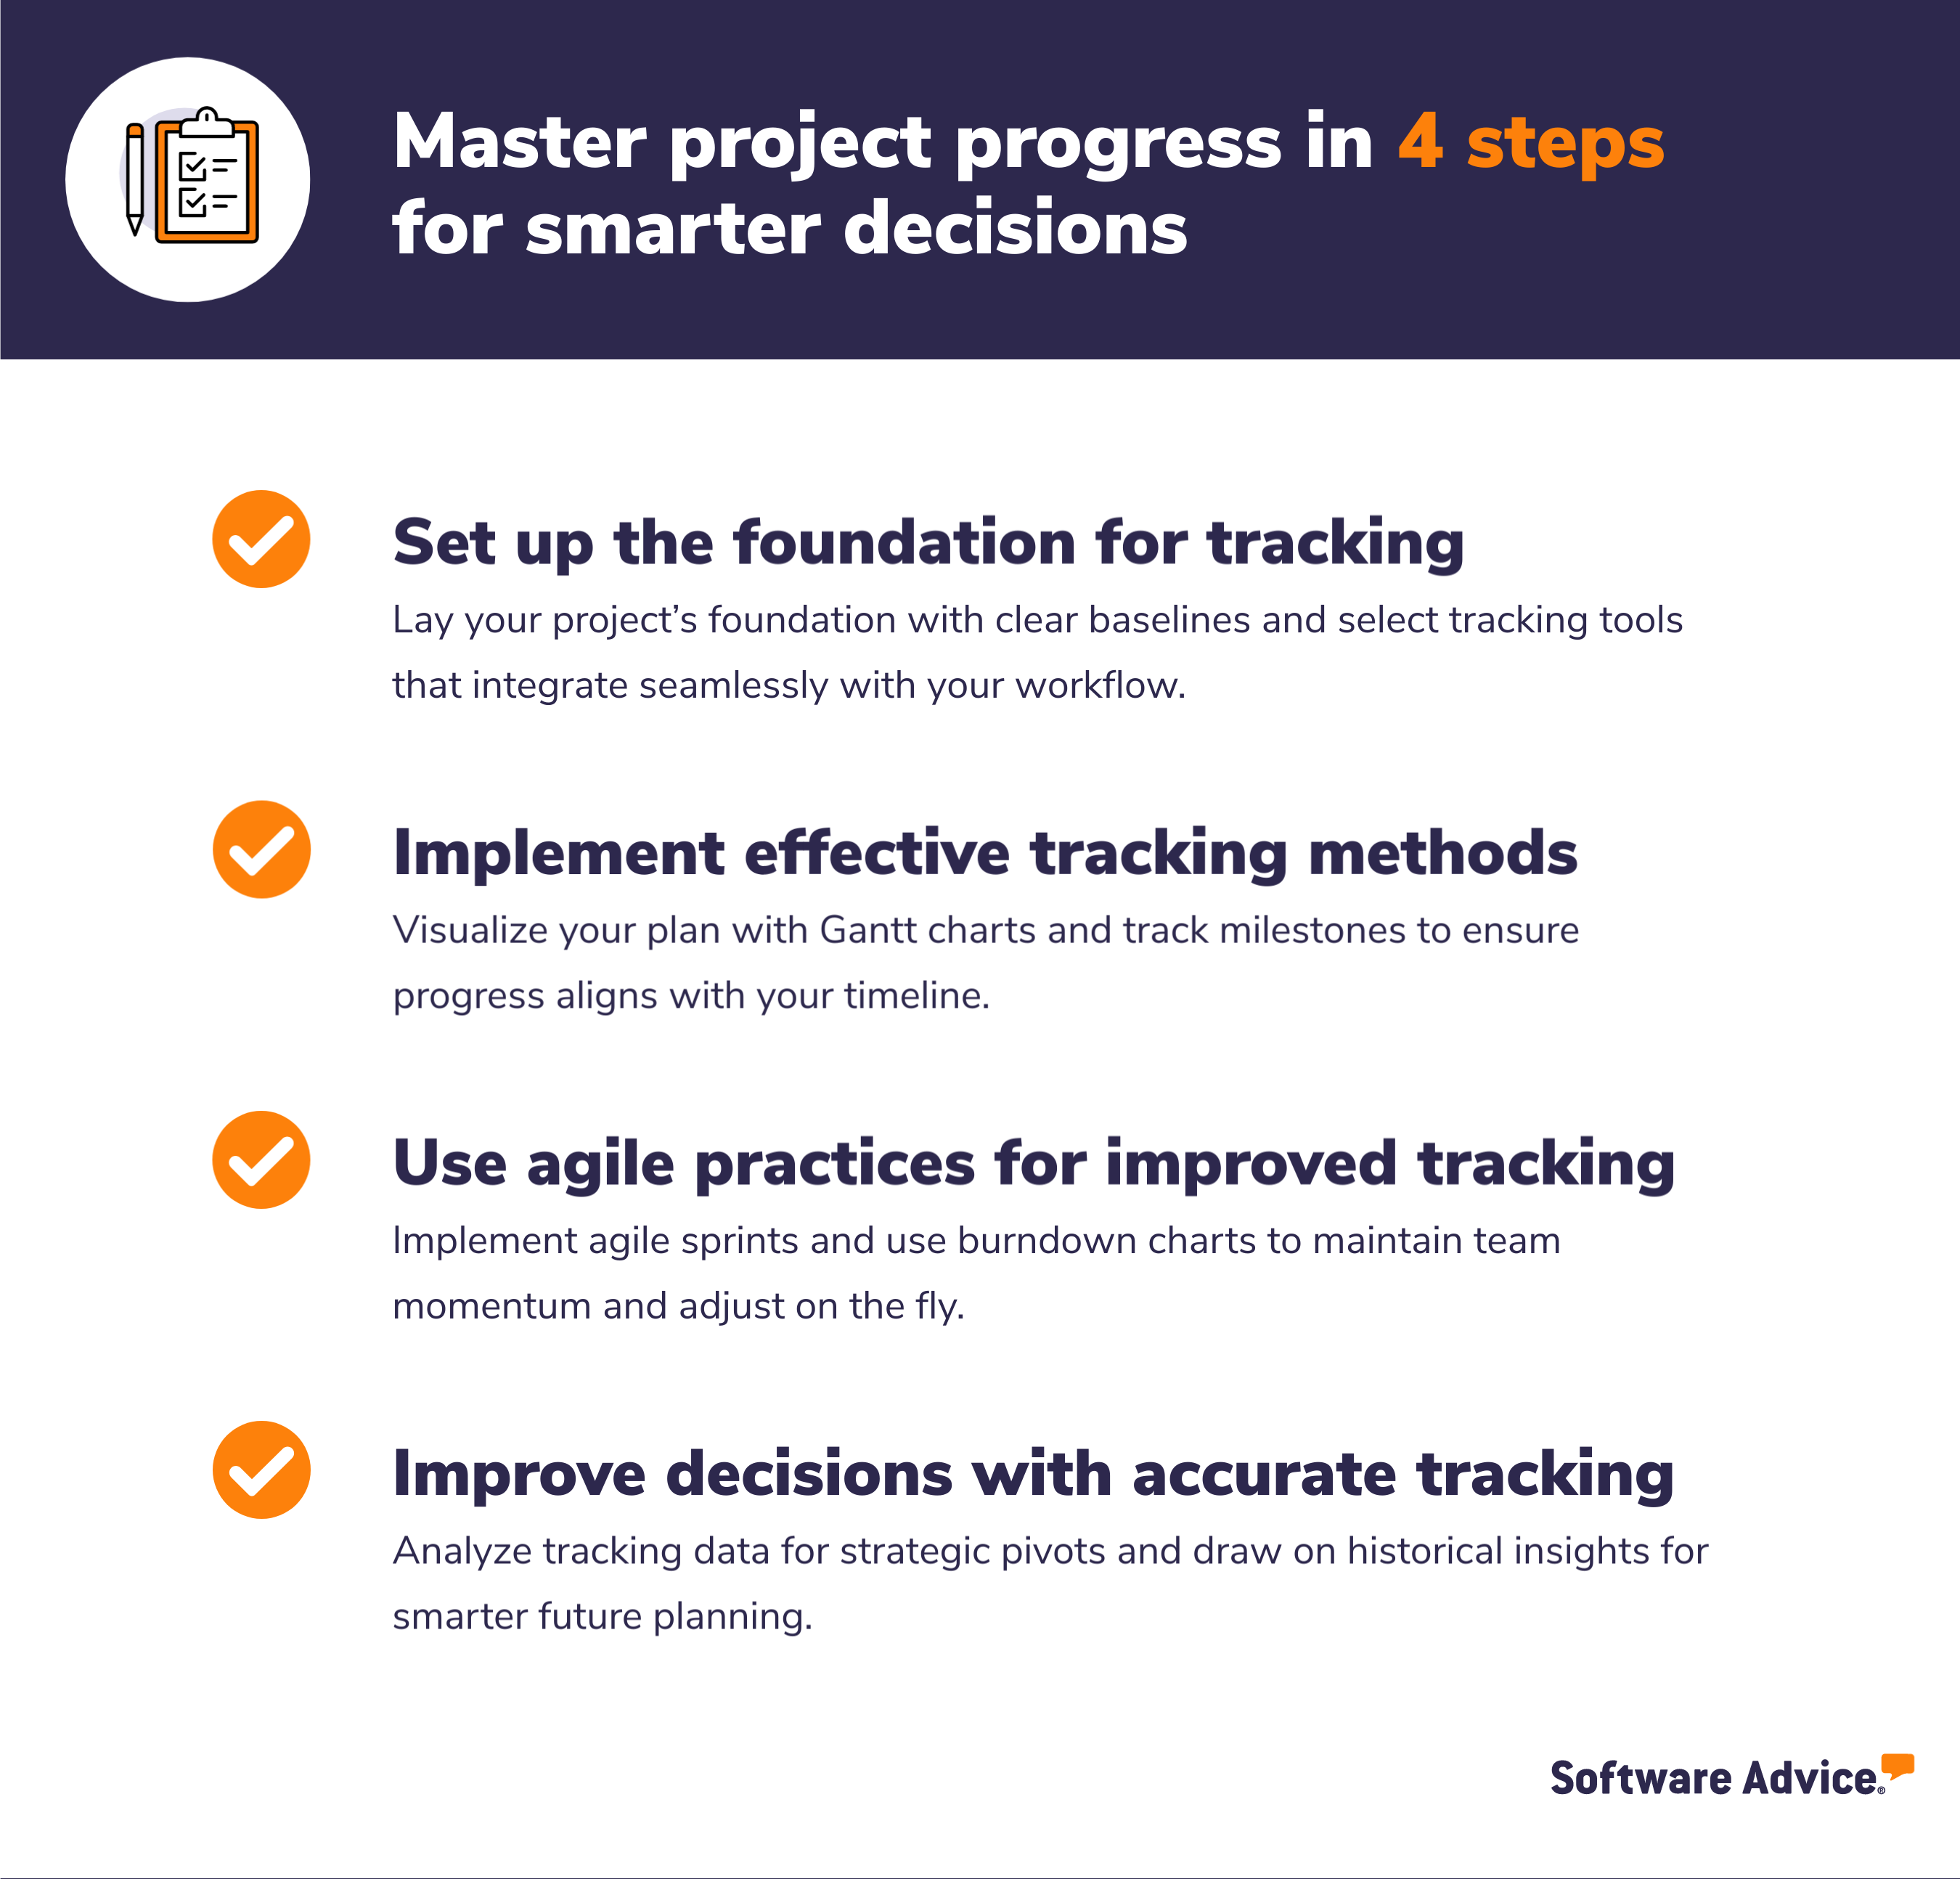 Master project progress in 4 steps for smarter decisions